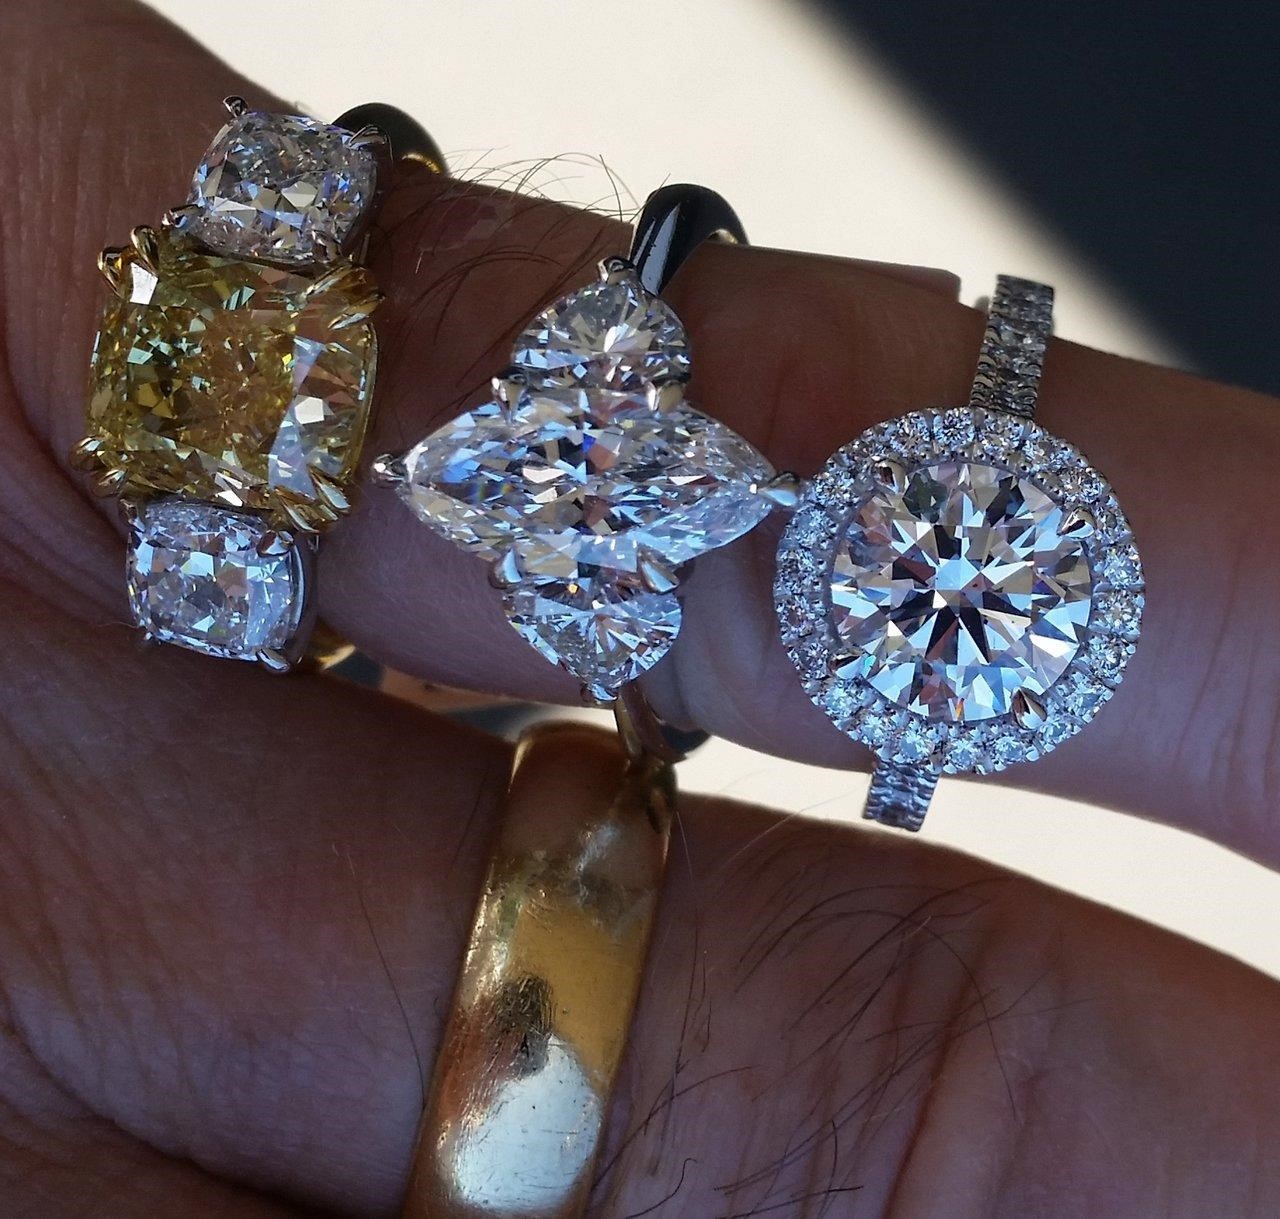 5 different cuts of diamonds in shade